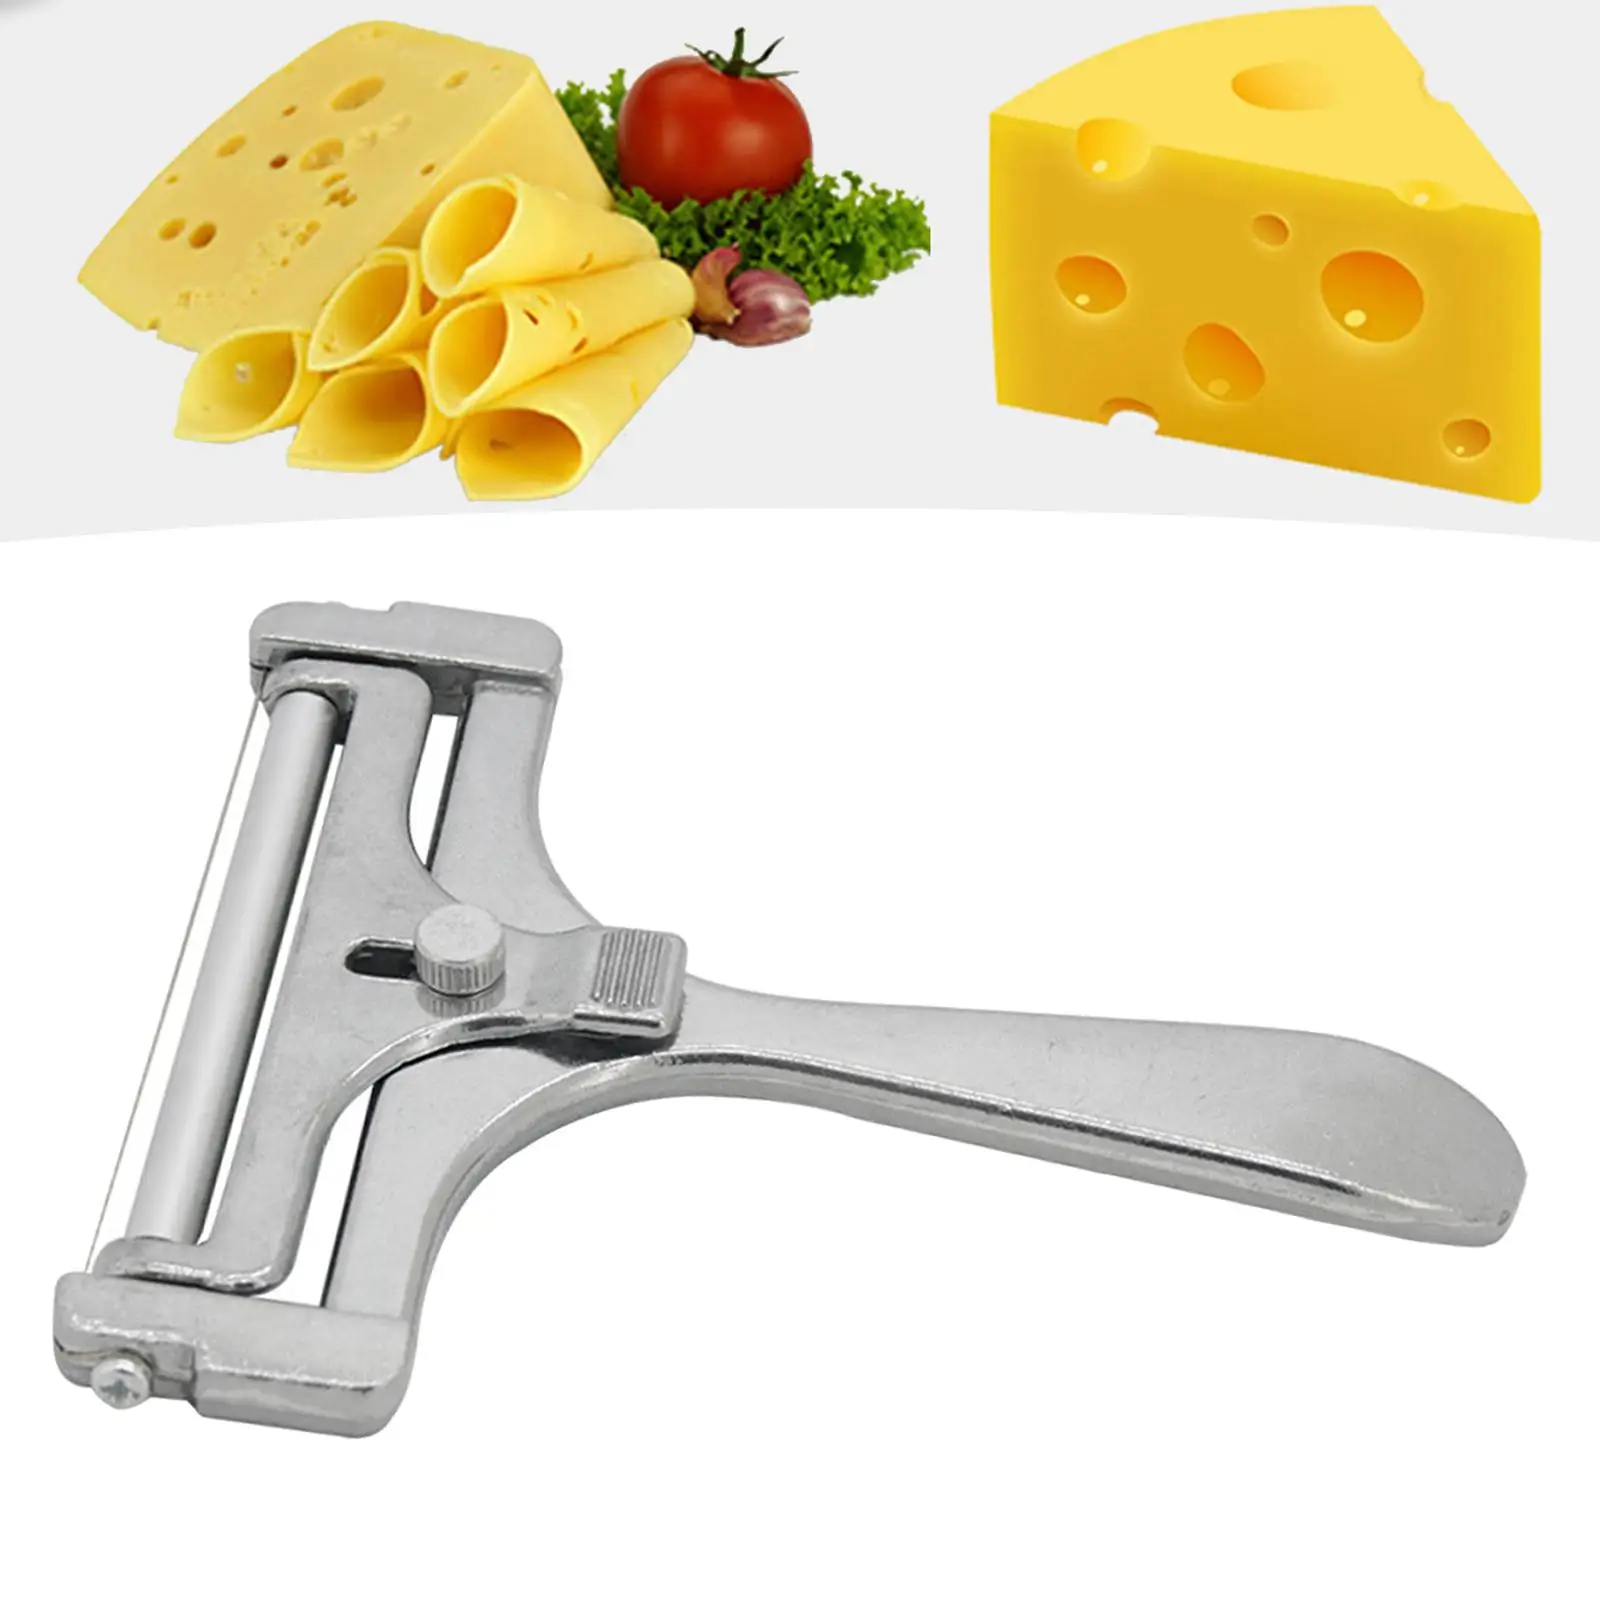 Multi-Function Cheese Slicer Butter Spatula Stainless Steel Nonstick Cheese Knives for Kitchen Cooking Home Cutting Utensil